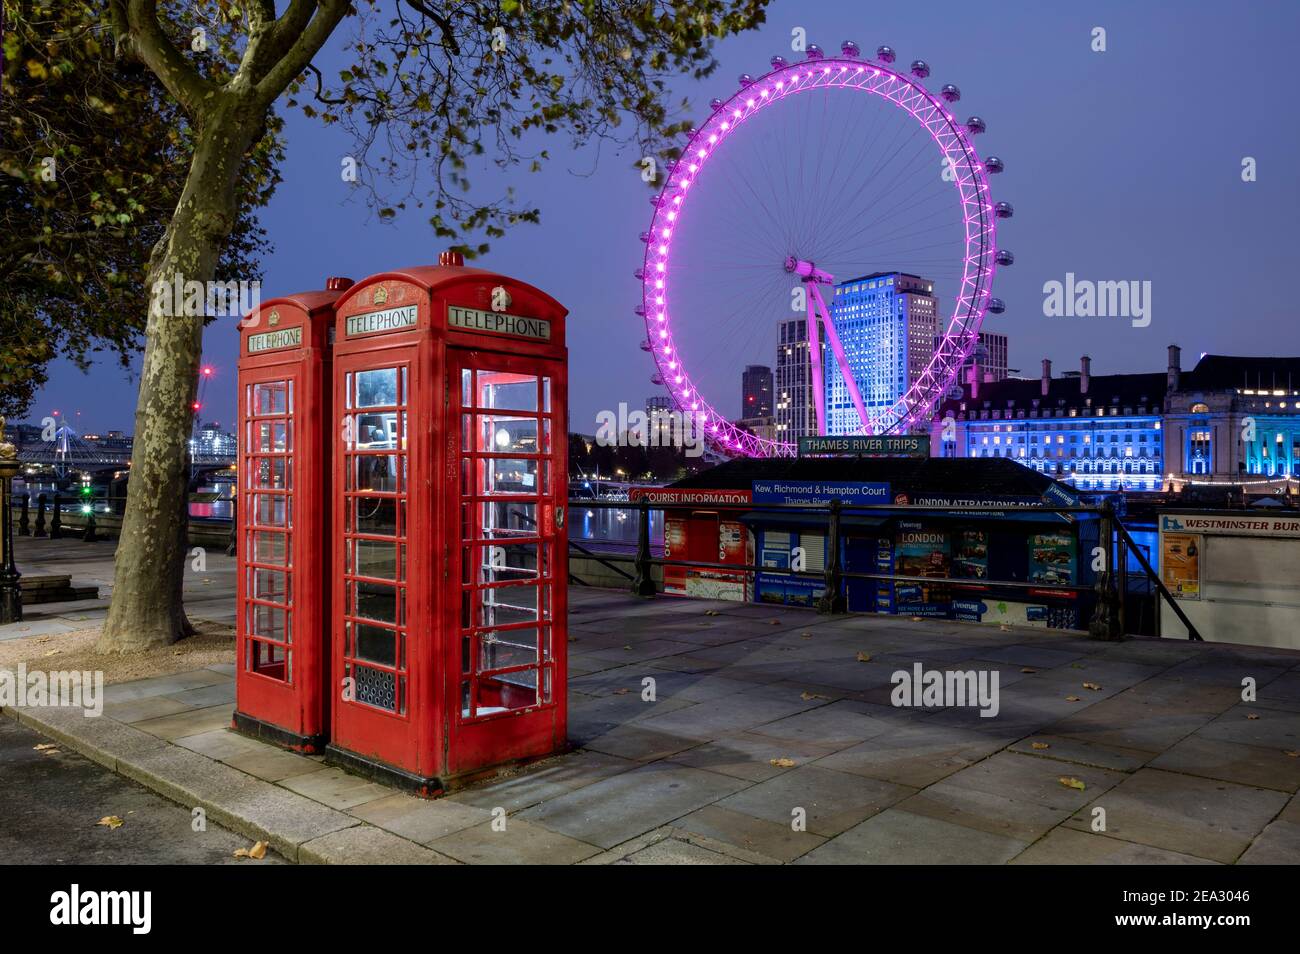 The London Eye at night with two red telephone boxes, London Stock Photo